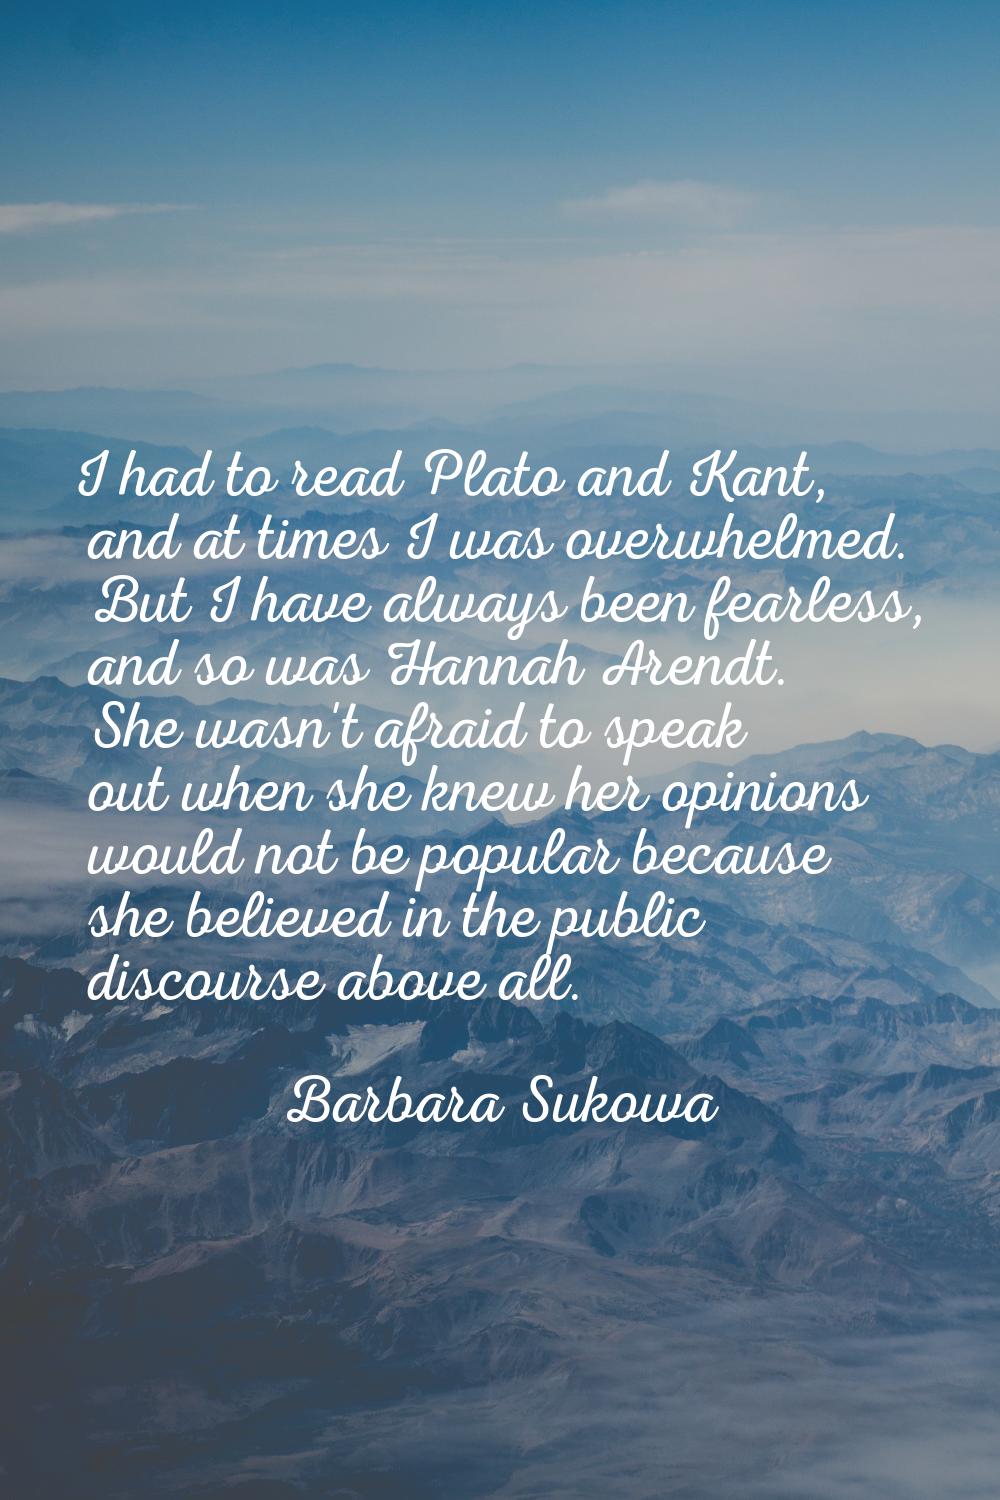 I had to read Plato and Kant, and at times I was overwhelmed. But I have always been fearless, and 